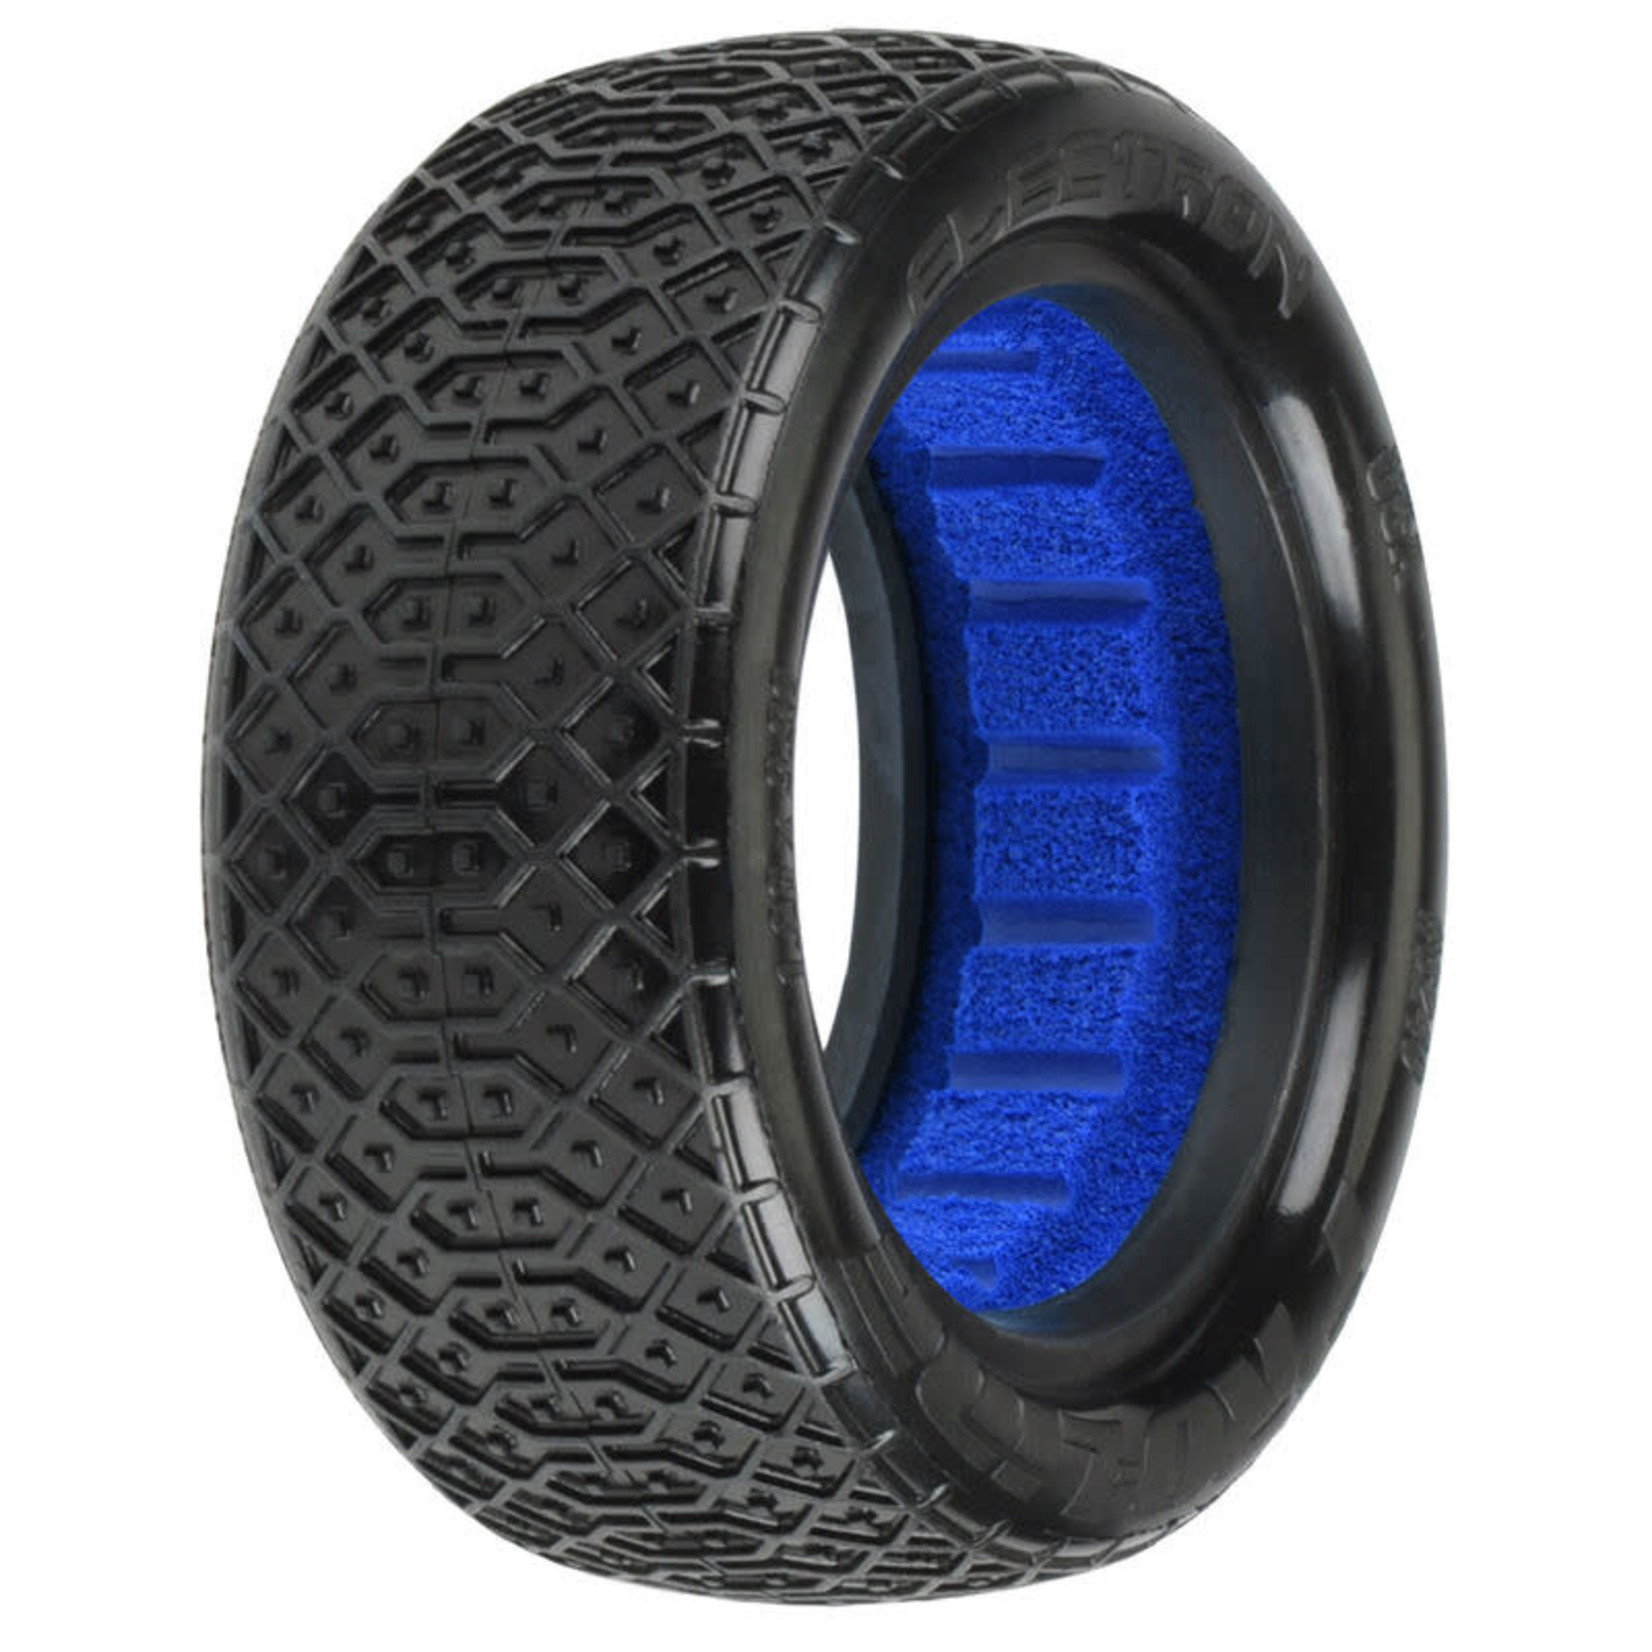 Pro-line Racing PRO8240203 **Pro-Line  1/10 Electron S3 4WD Front 2.2" Off-Road Buggy Tires (2) ##